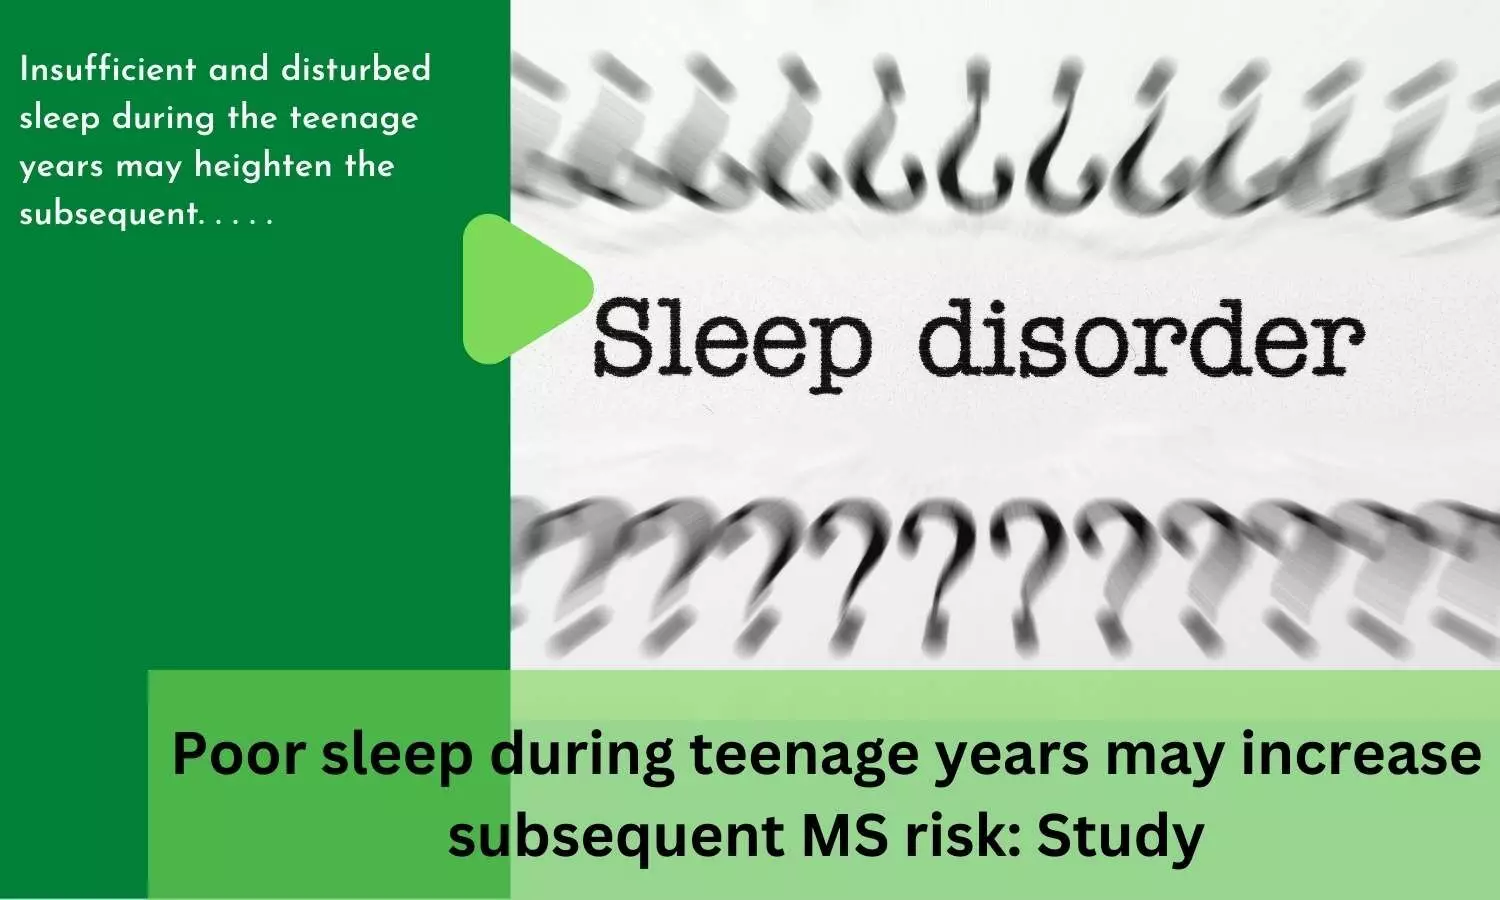 Poor sleep during teenage years may increase subsequent MS risk: Study